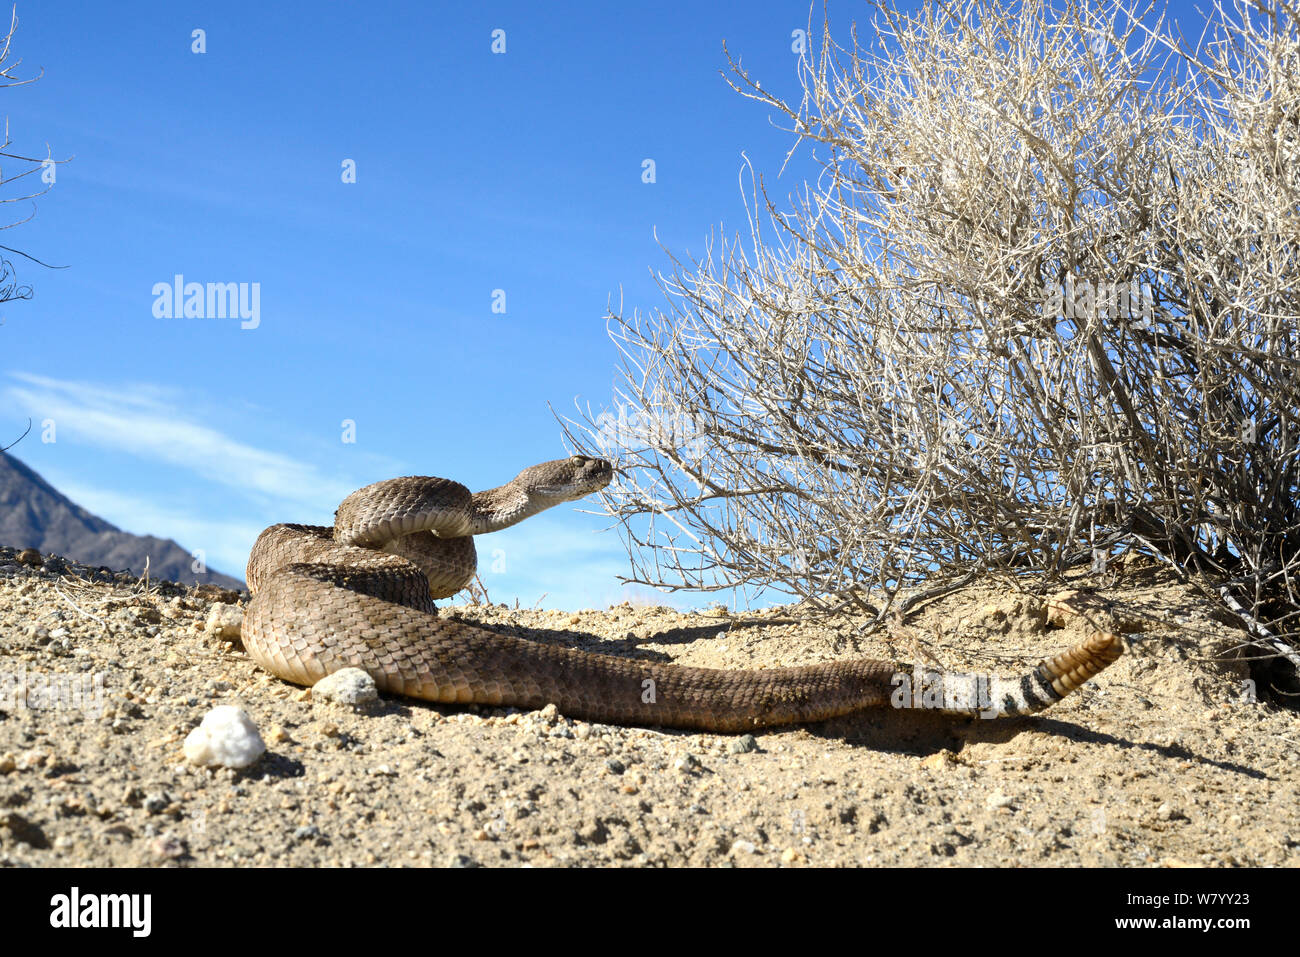 Western diamondback rattlesnake (Crotalus atrox)  coiled up with rattle up, Arizona, USA, Controlled conditions Stock Photo